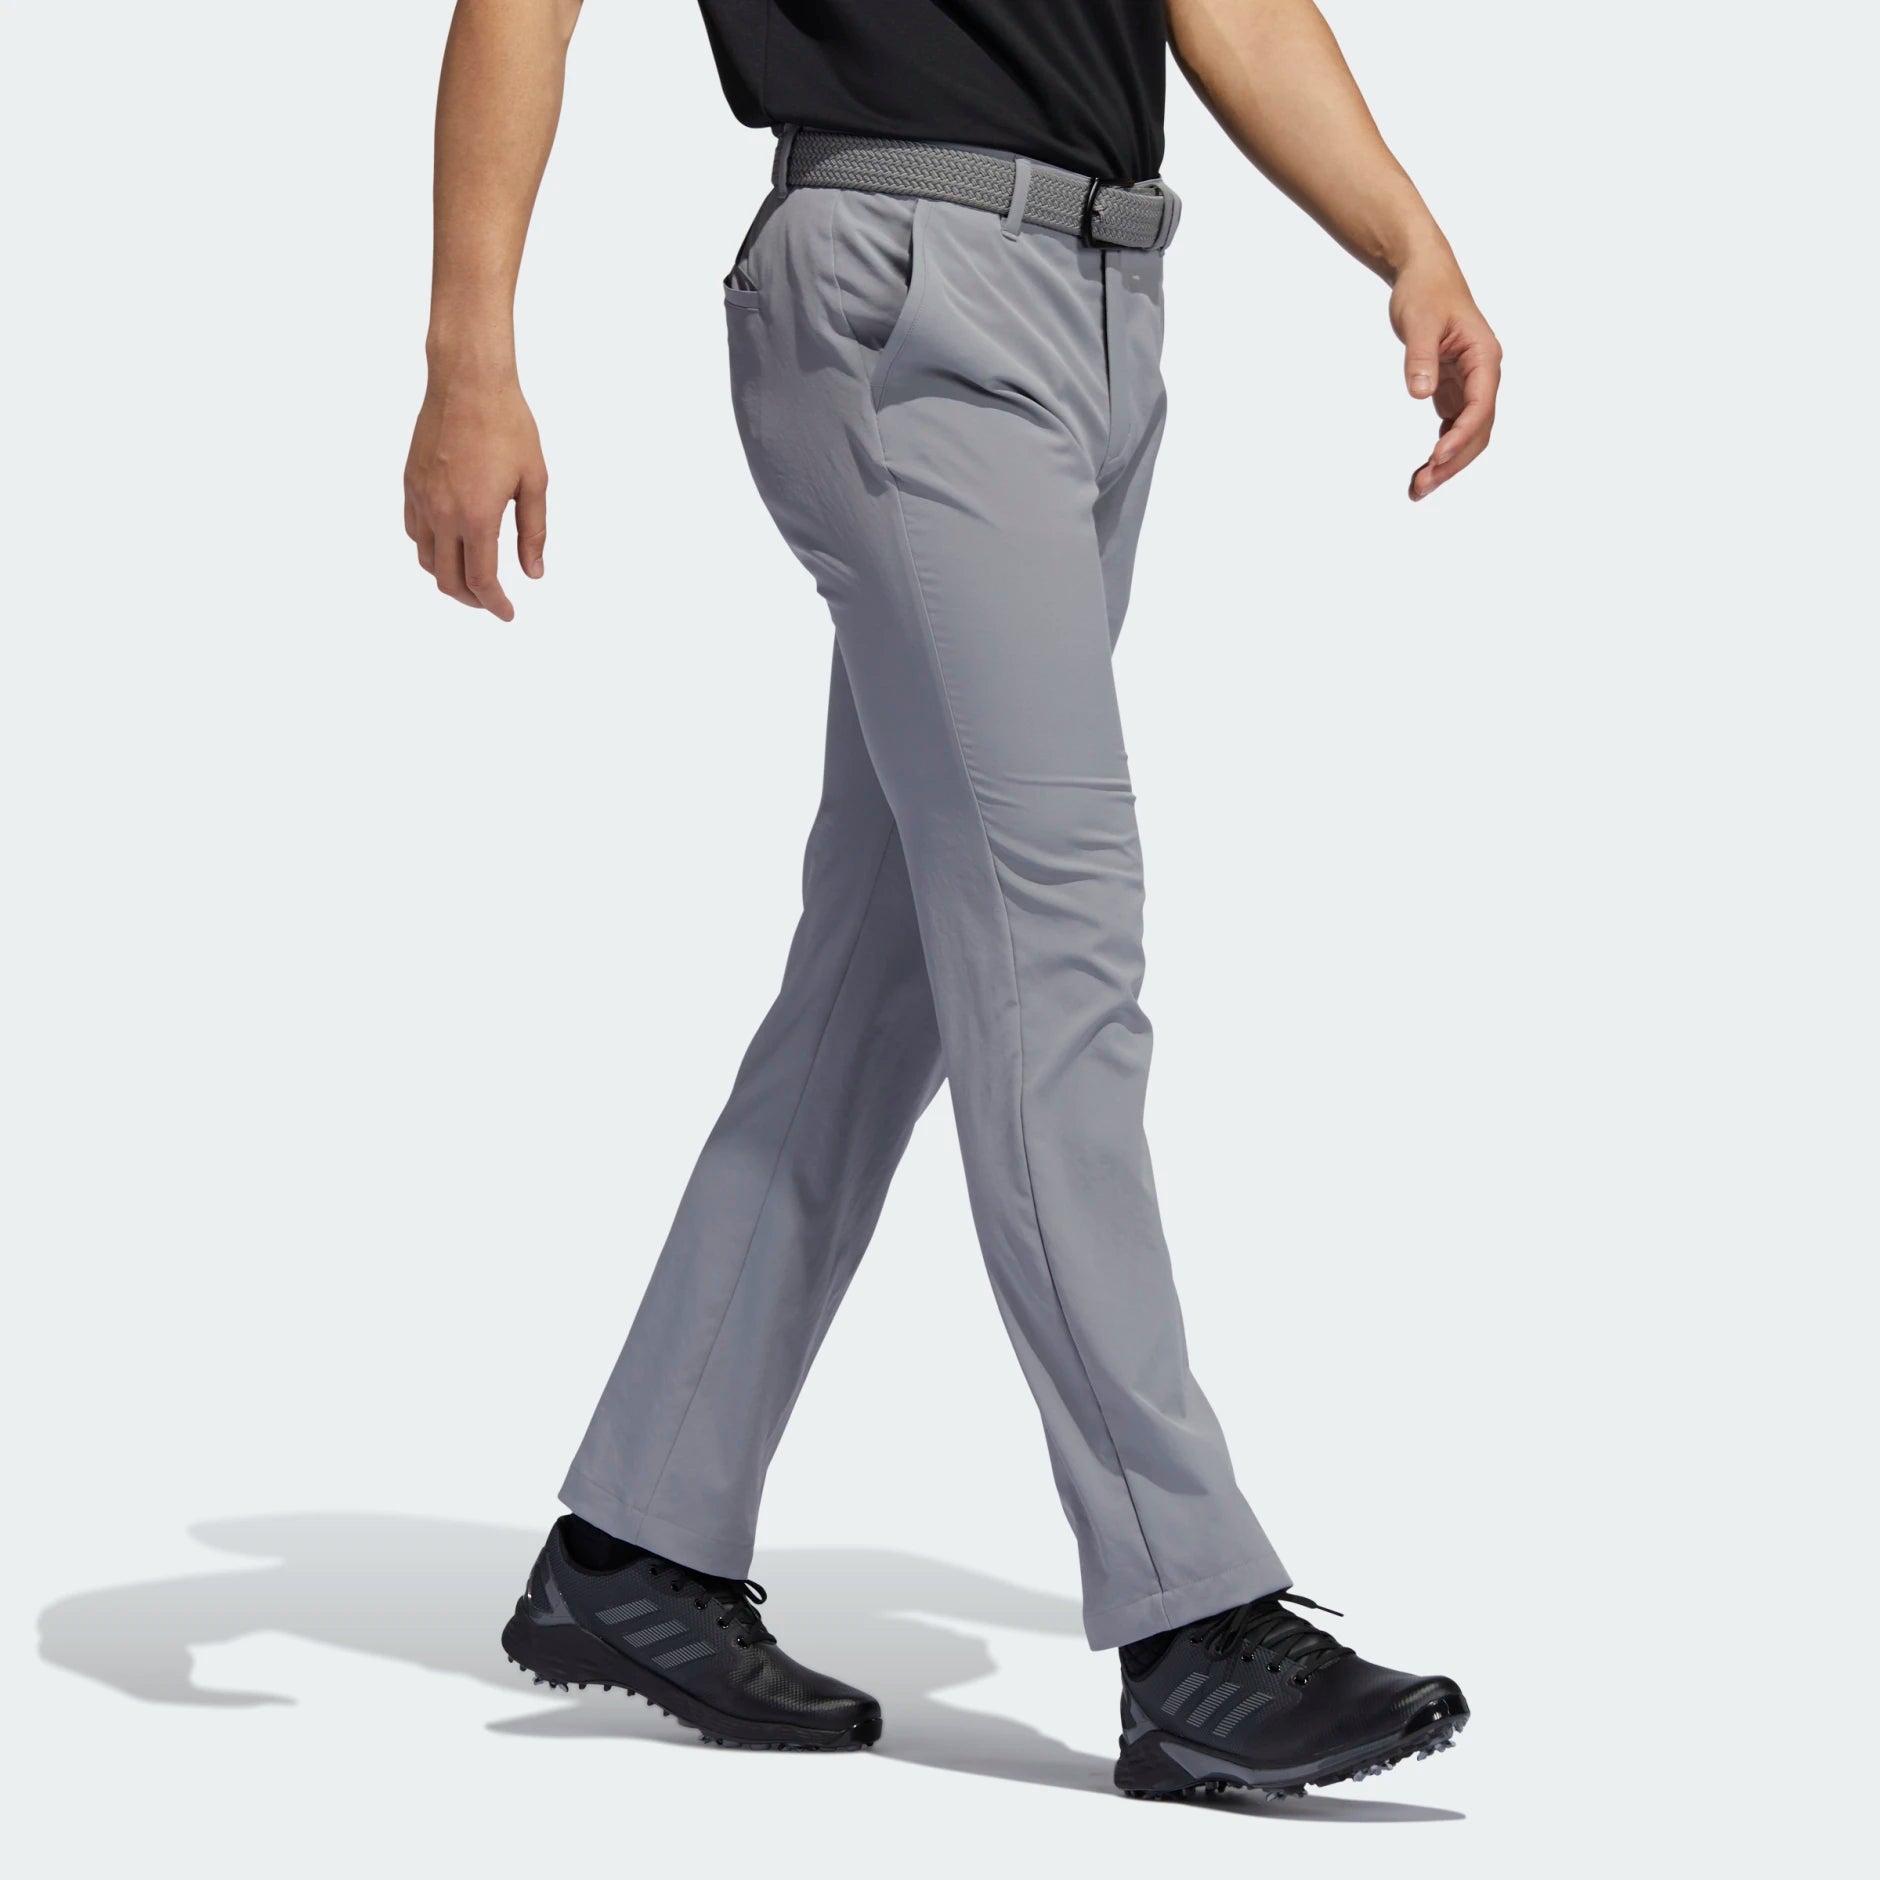 Golf Apparel Mens Trousers - 83 models in stock starting from 10.00€ |  DIGITALGOLF